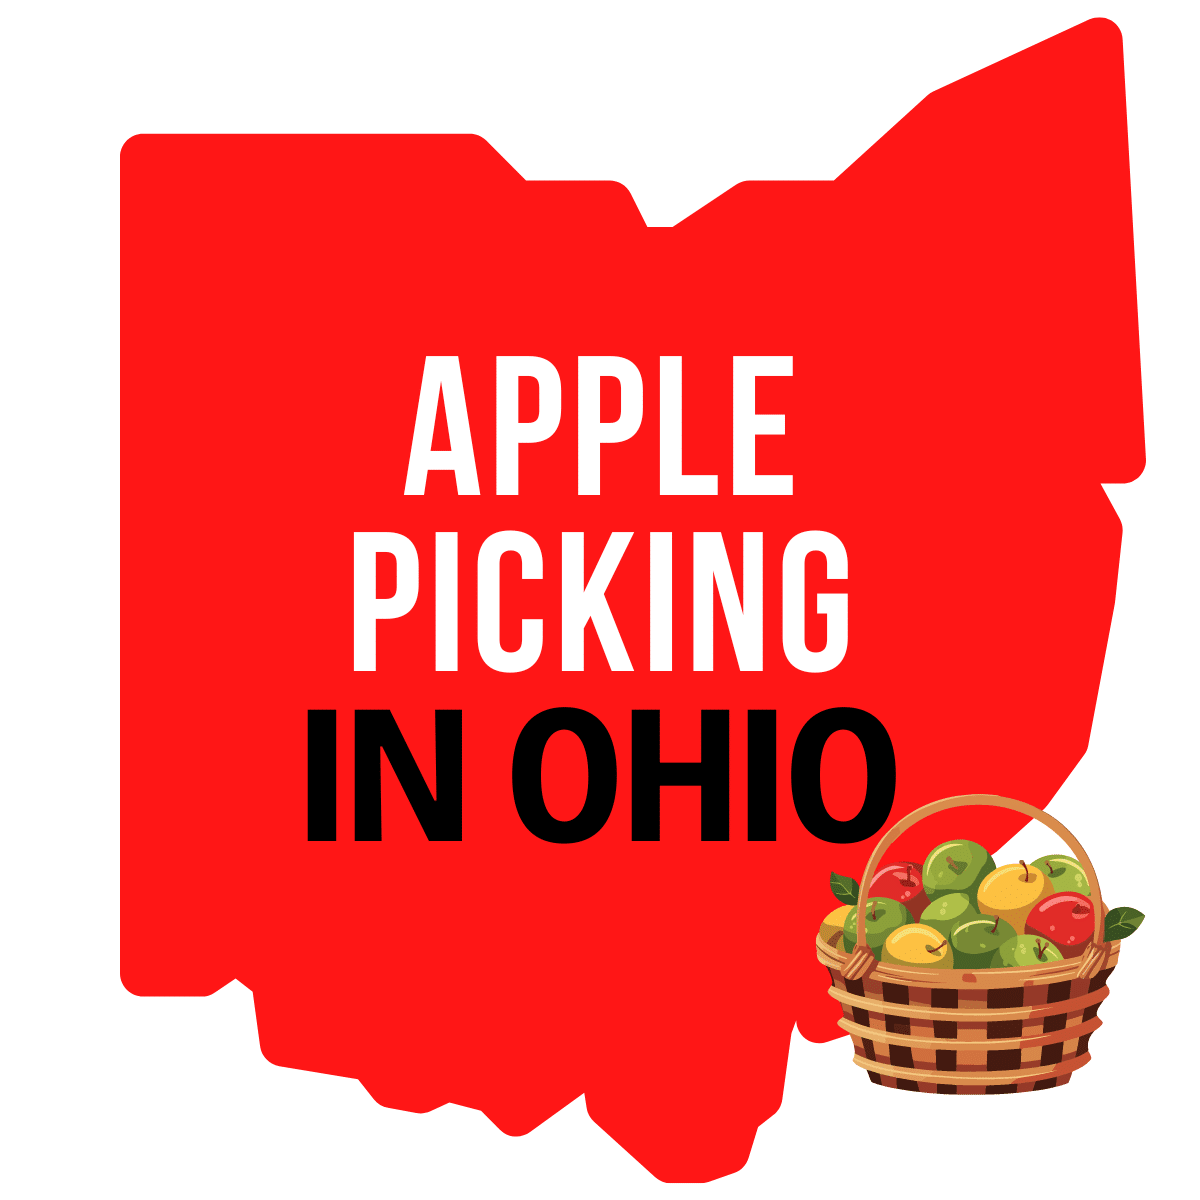 square image with a large red map of Ohio containing the text Apple Picking in Ohio with a small clipart of a basket of apples in the bottom right corner